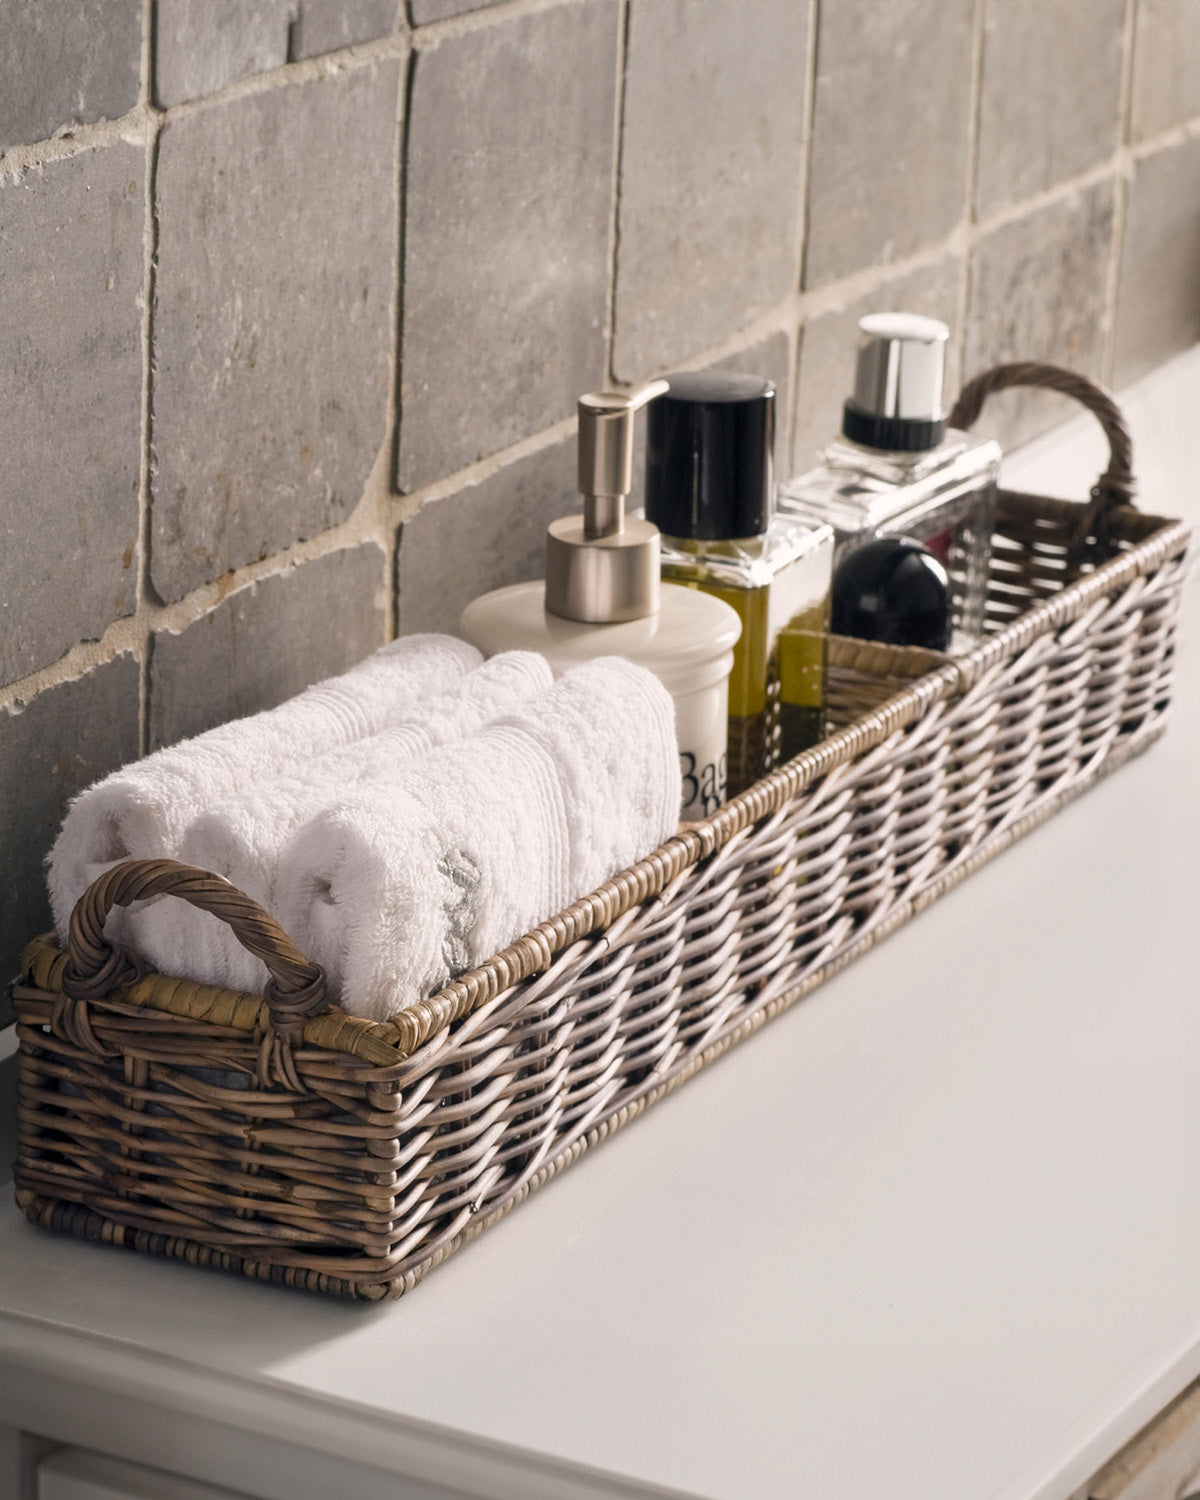 Rectangular  reed basket, decorated with towels, and soap by Riviera Maison